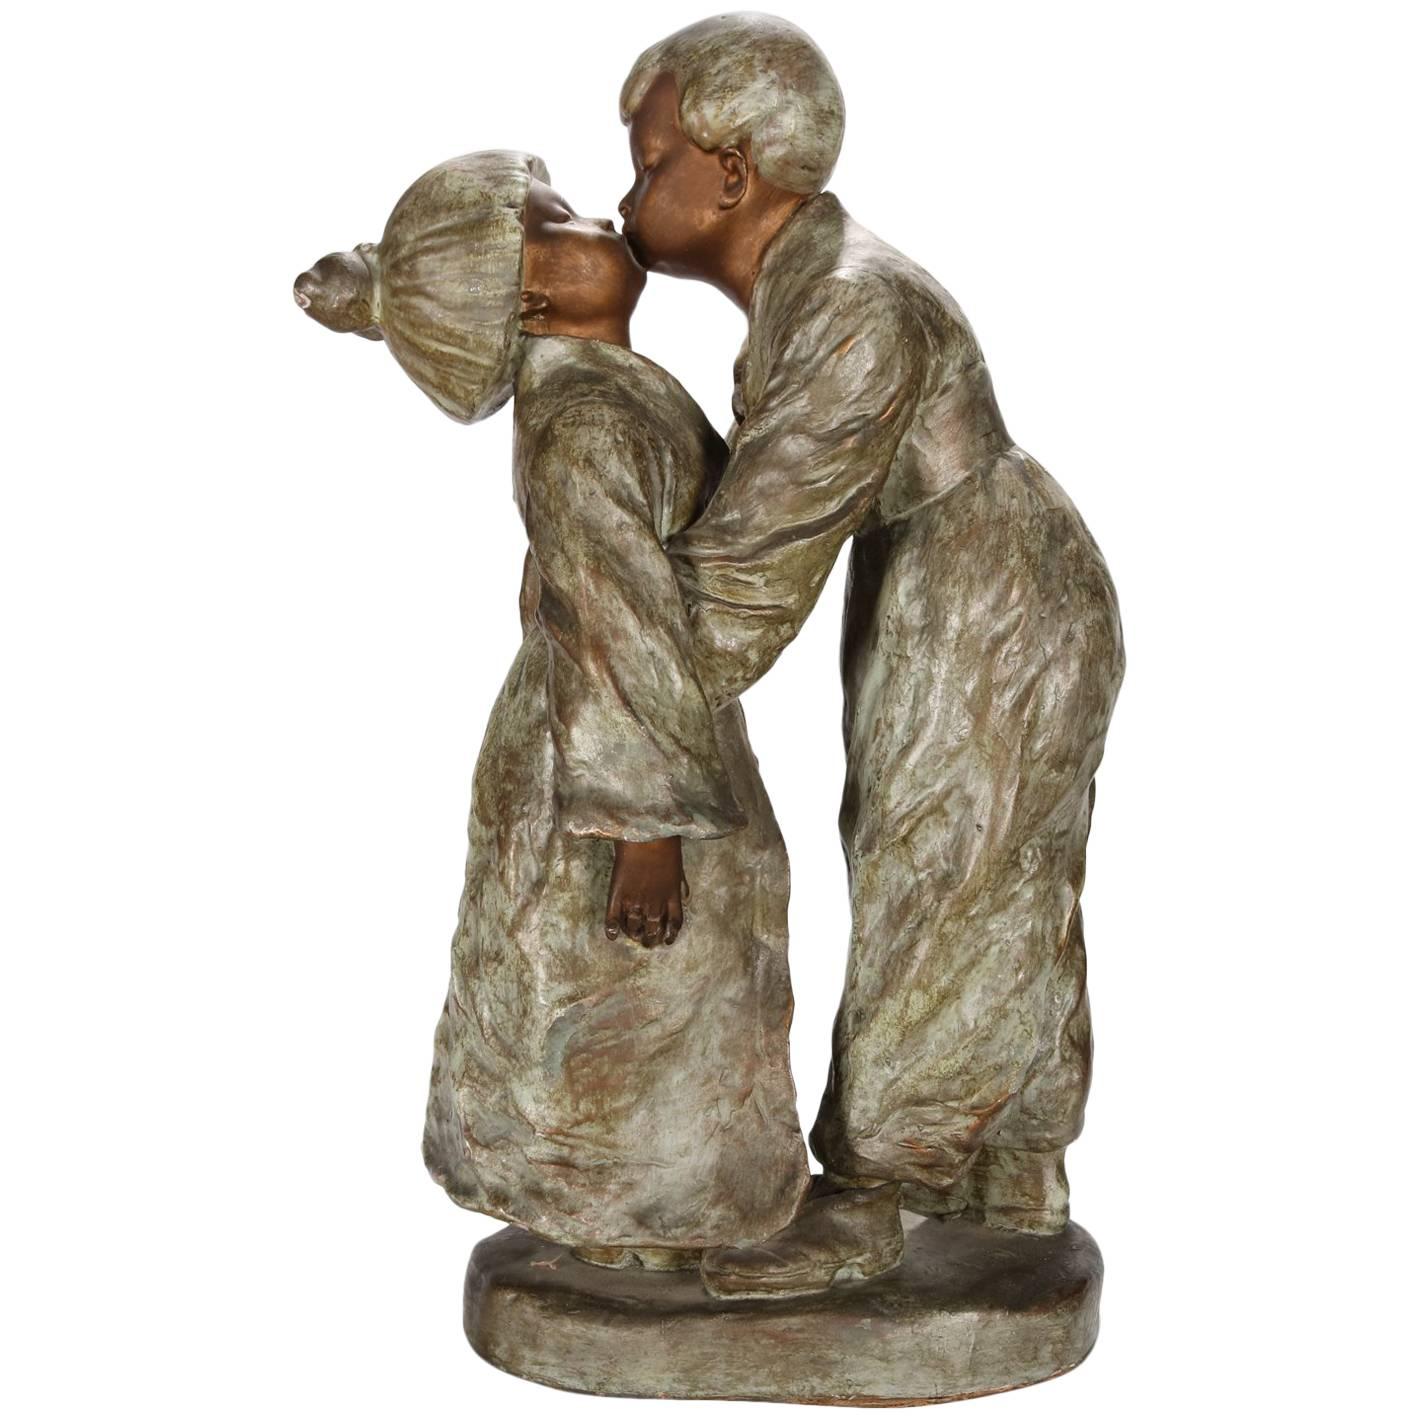 Antique Chinese Figural Bronzed Terracotta Statue, Young Love, circa 1920